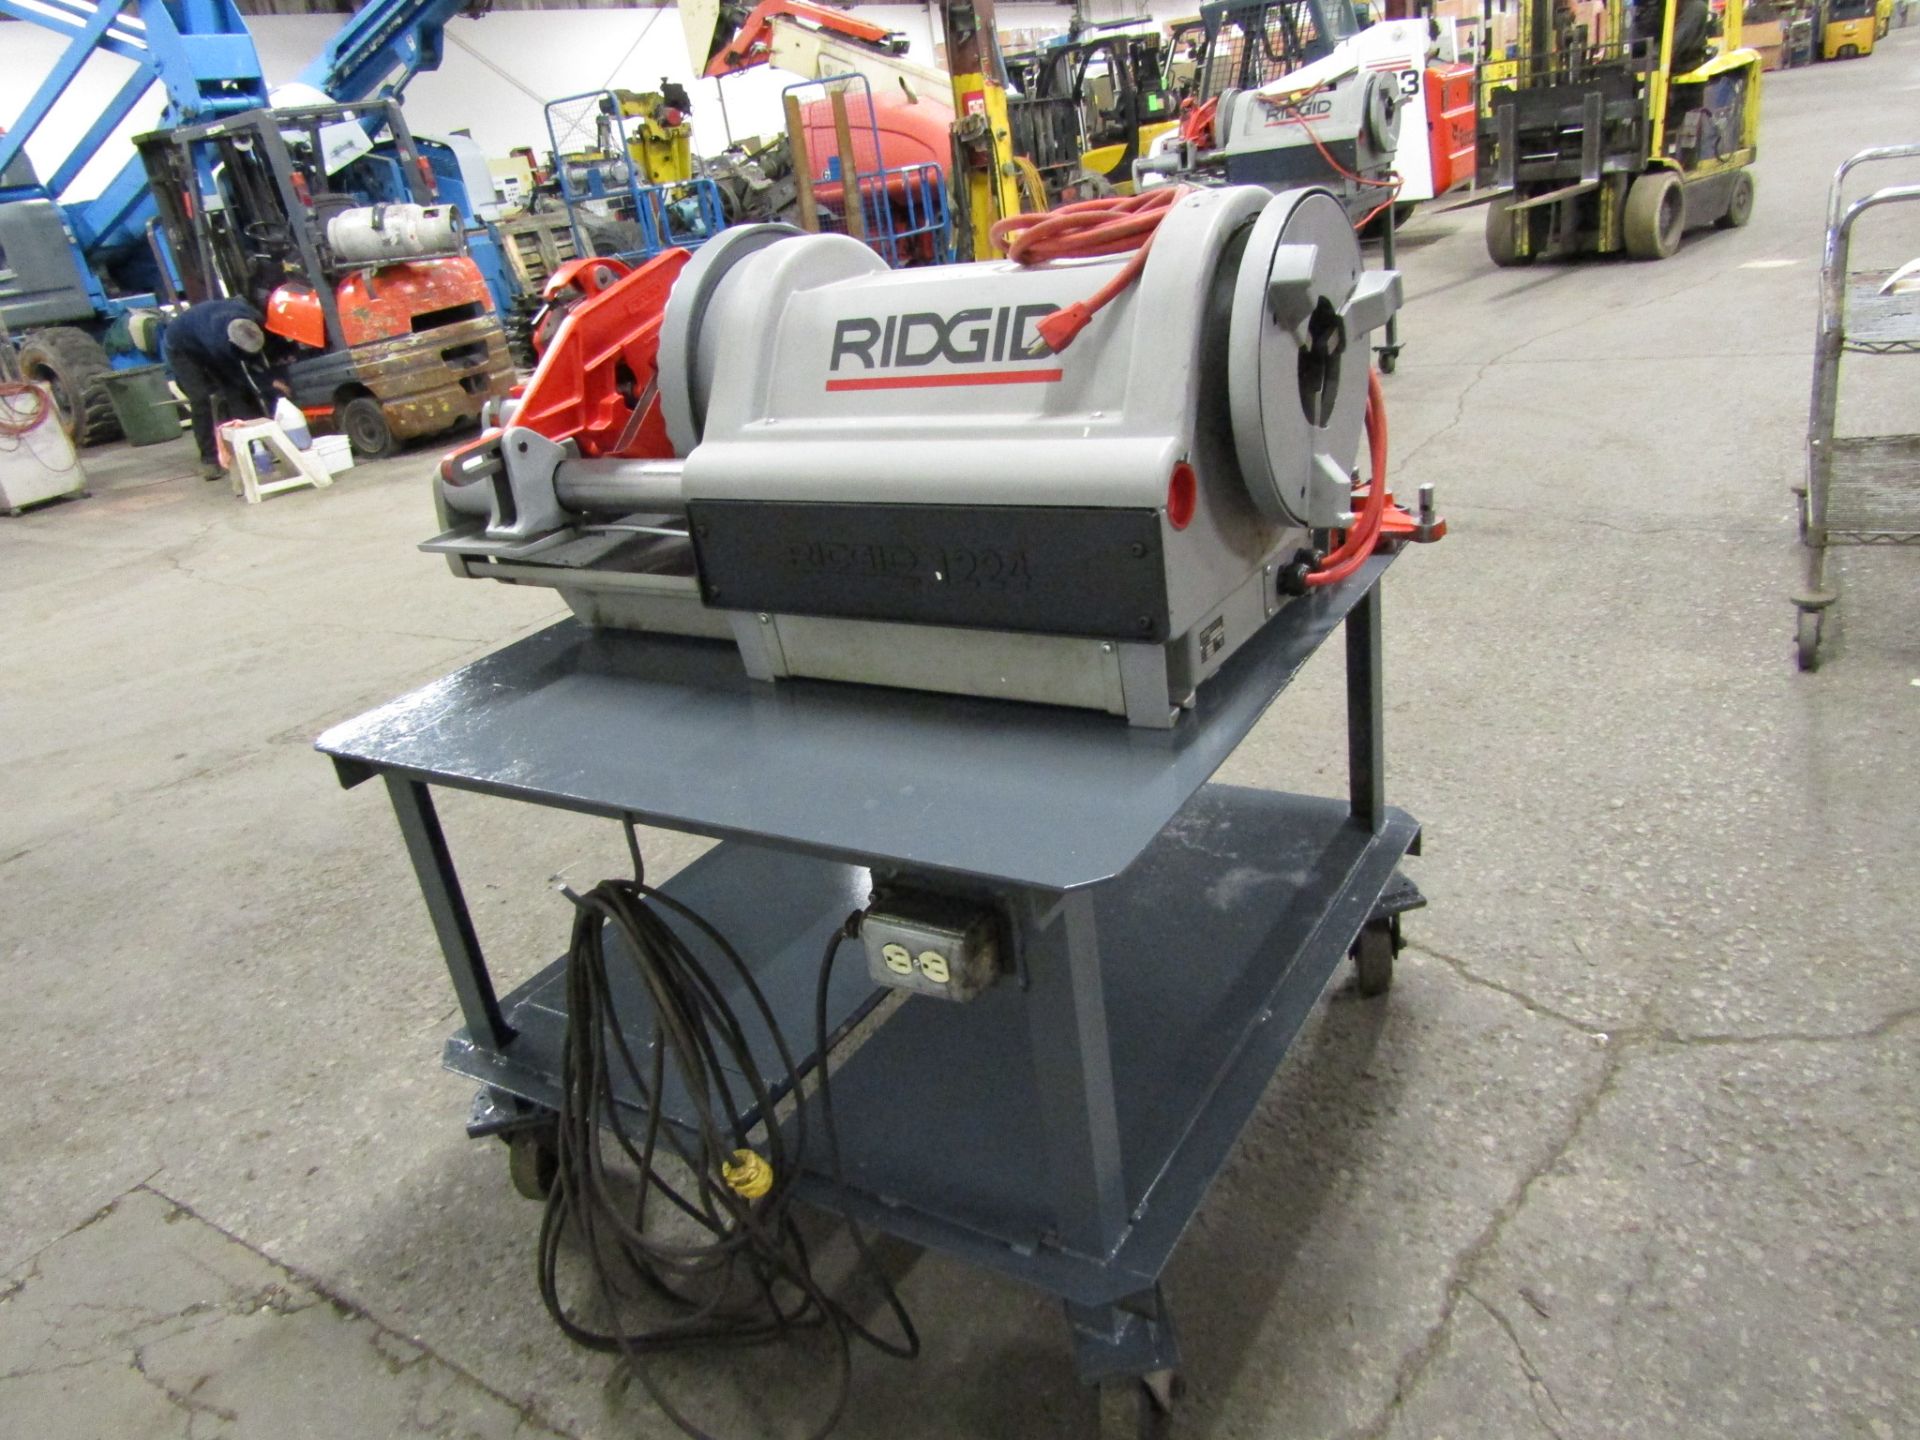 Ridgid 1224 Pipe Threader with 1/8" to 4" capacity w dies - complete like new with cutter die reamer - Image 4 of 4